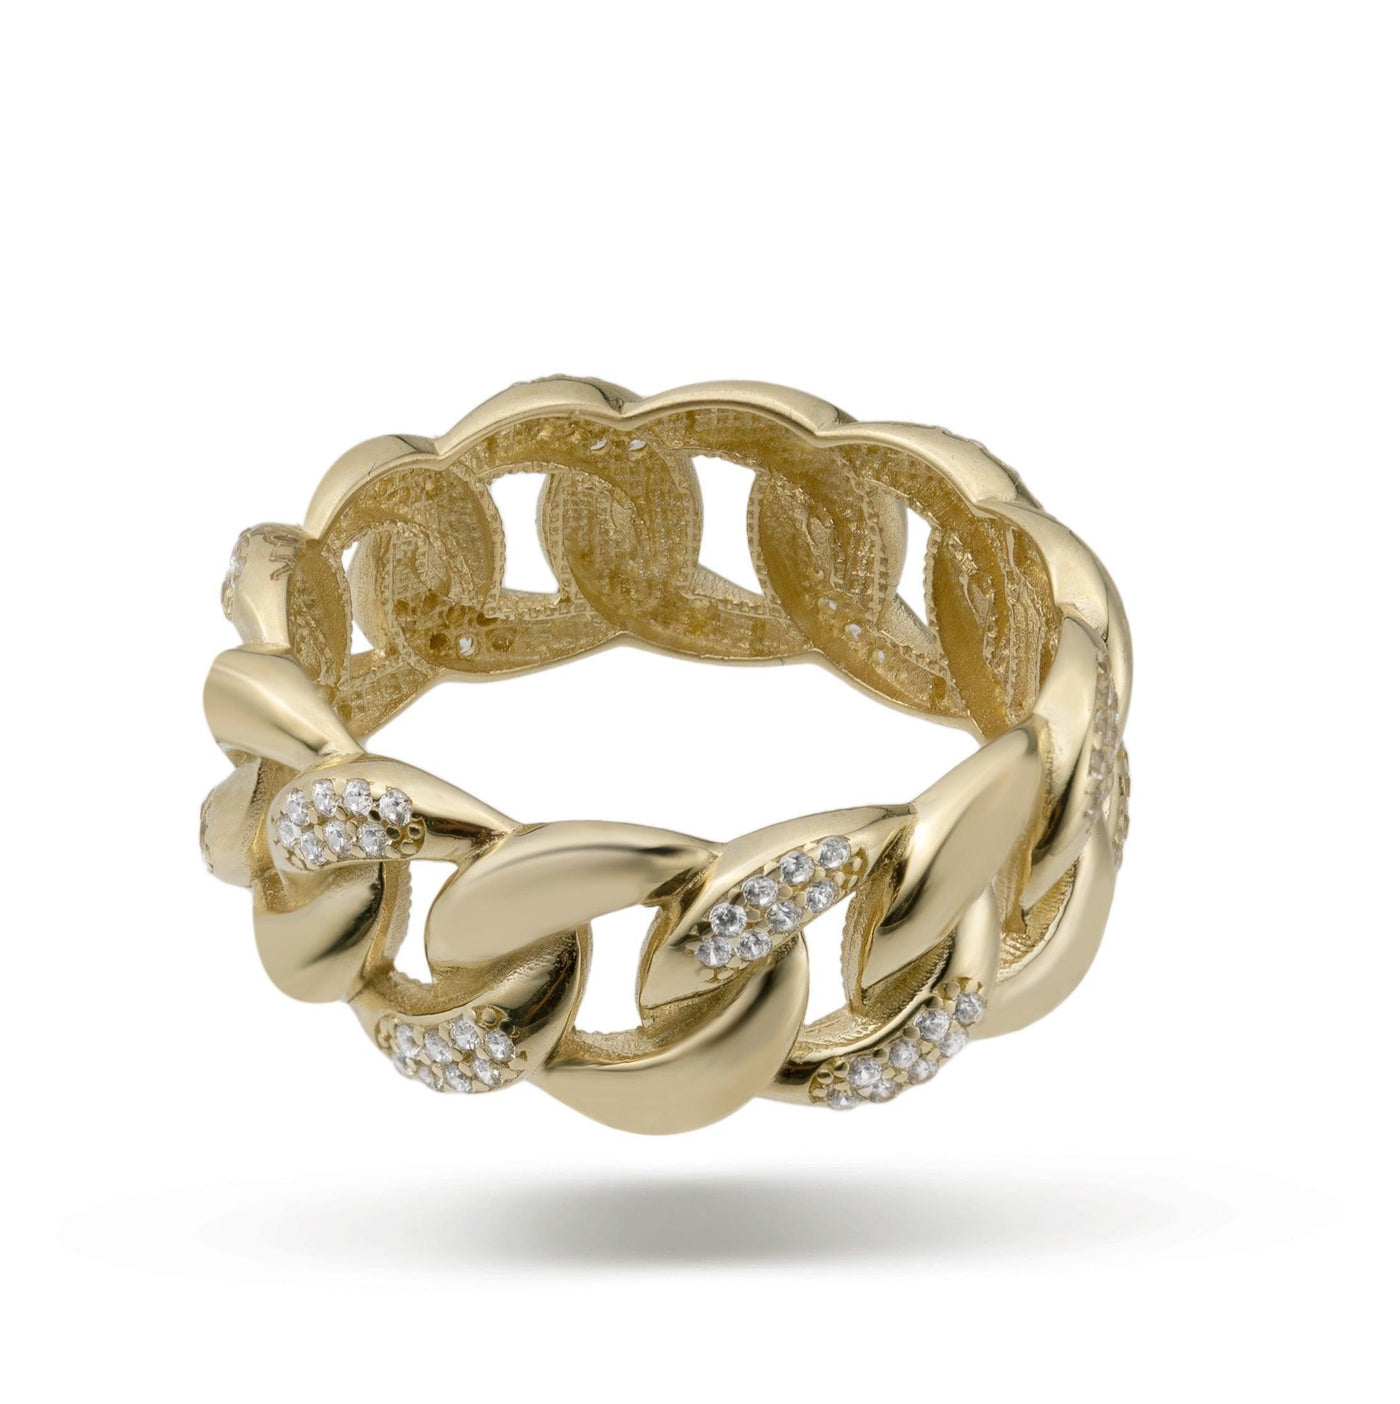 Unisex CZ Miami Cuban Curb Link Ring Solid 10K Yellow Gold Size 10.5 - bayamjewelry